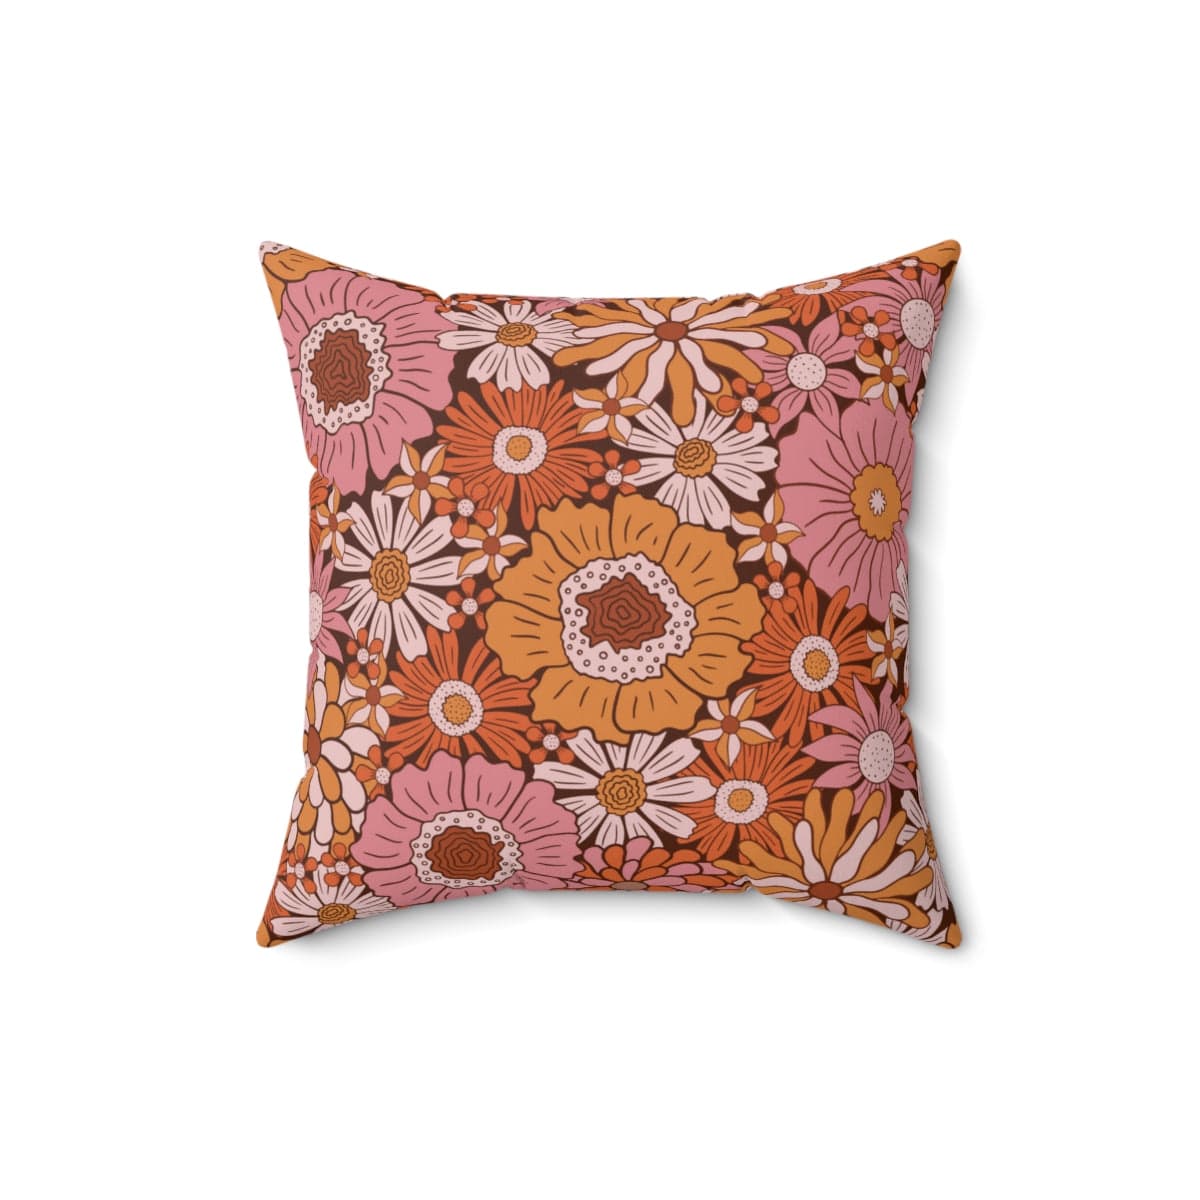 Kate McEnroe New York Mid Century Modern Groovy Floral Pillow Home Decor 16&quot; × 16&quot; 21007280403940026370